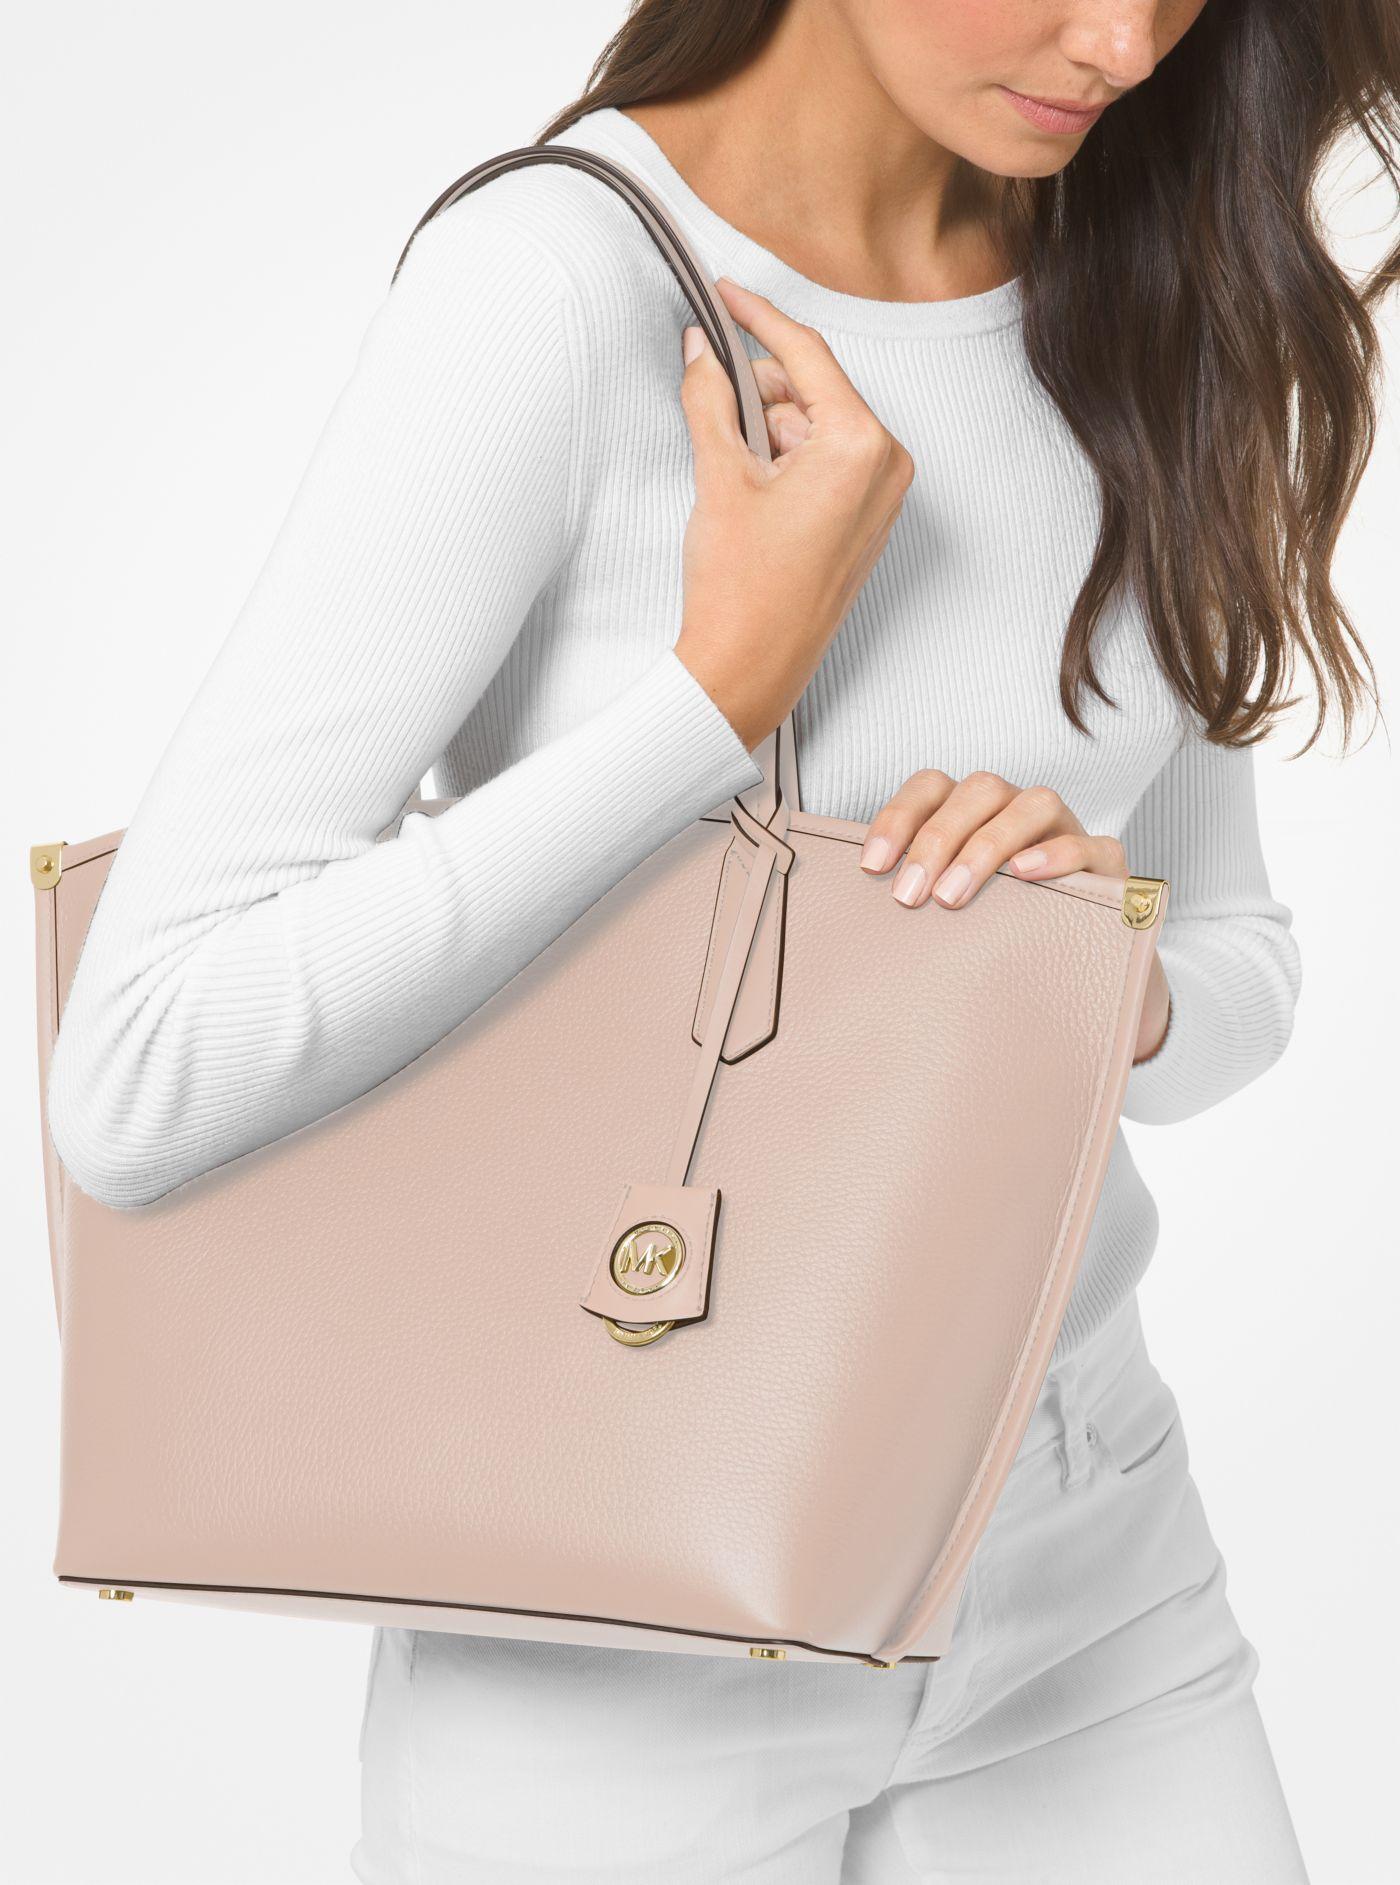 Michael Kors Jane Large Pebbled Leather Tote Bag in Pink | Lyst